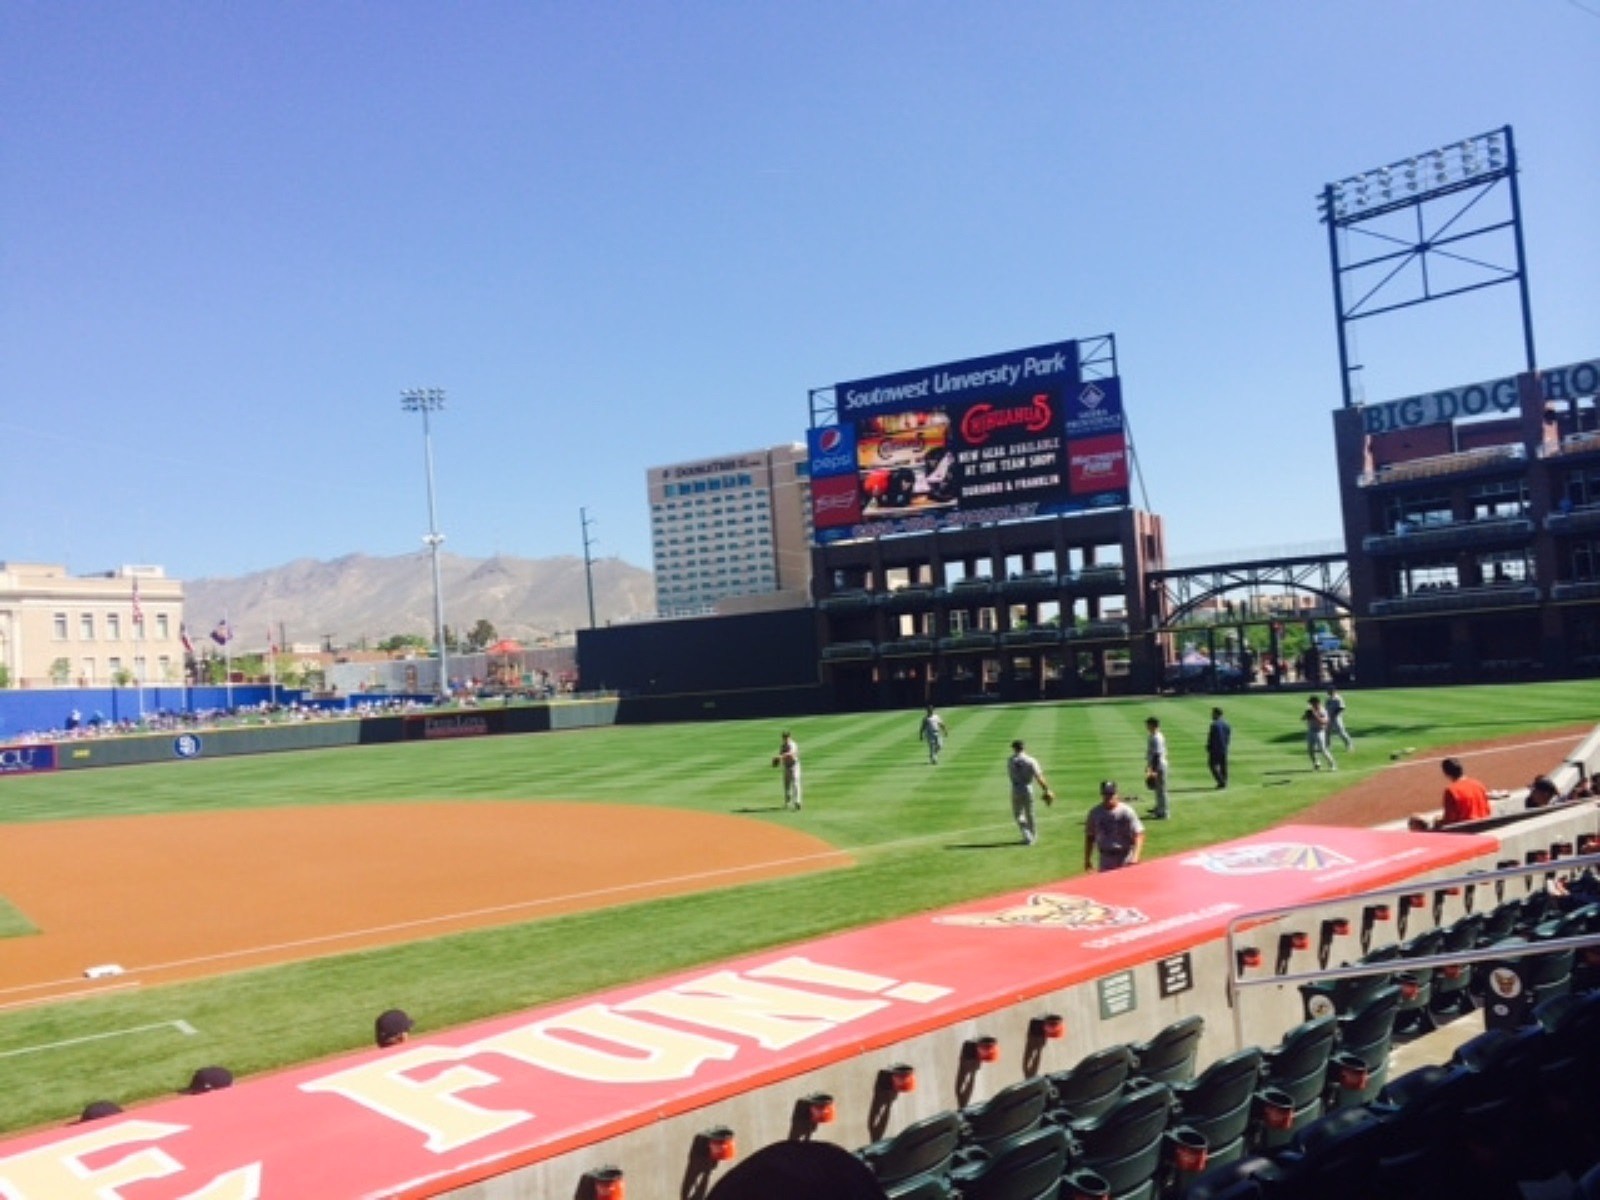 The Diablos are back, thanks to the Chihuahuas